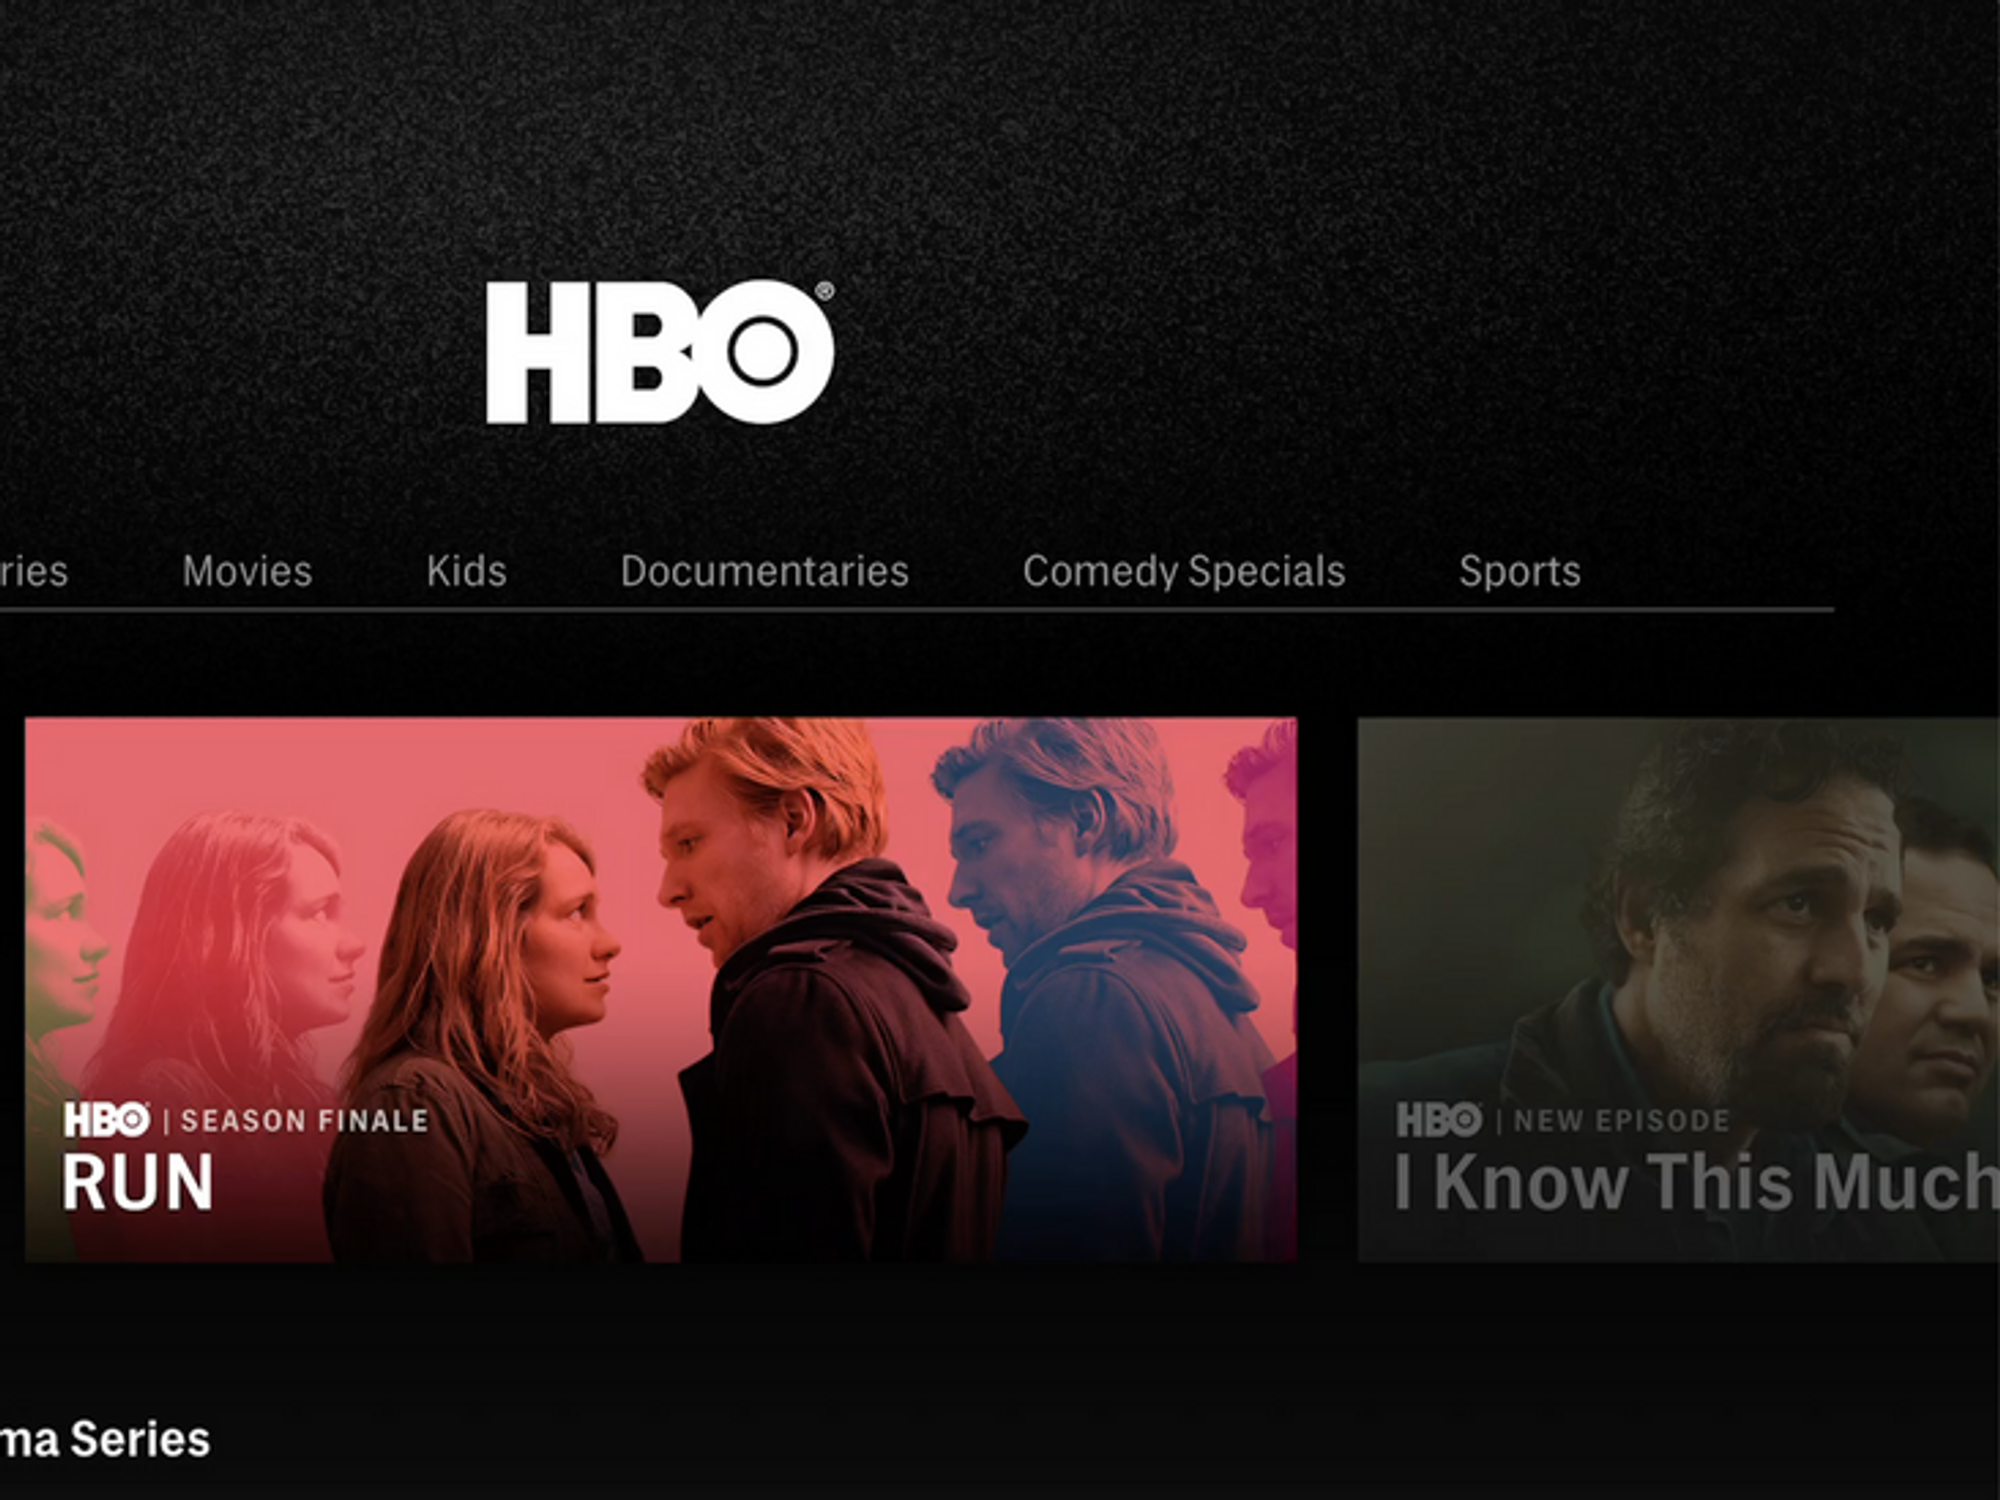 HBO Max price: plans, deals, and what to expect from the Discovery Plus  merger